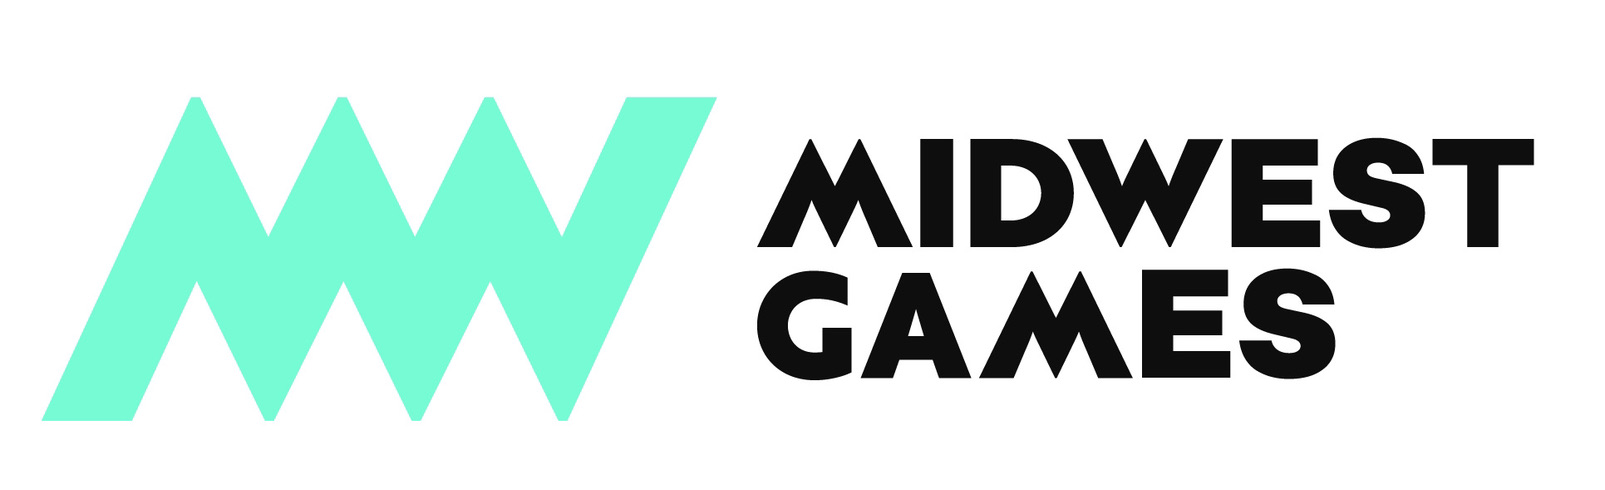 Midwest Games logo